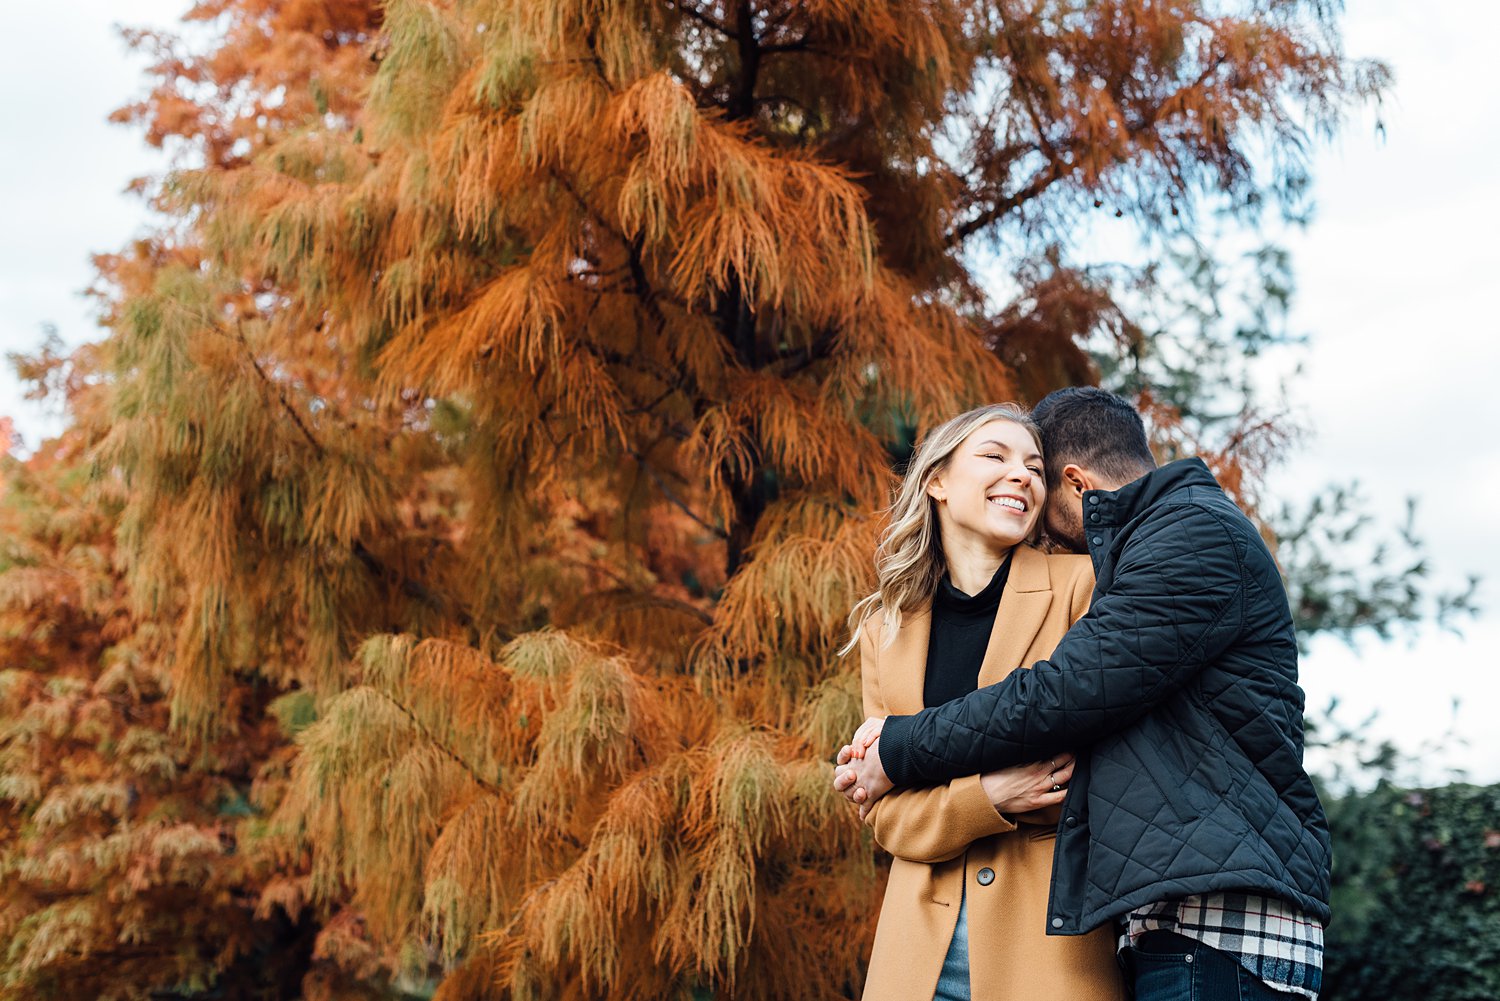 Shelby + Tim - Old City Engagement Session - Olney Maryland Engagement Photographer - Alison Dunn Photography photo